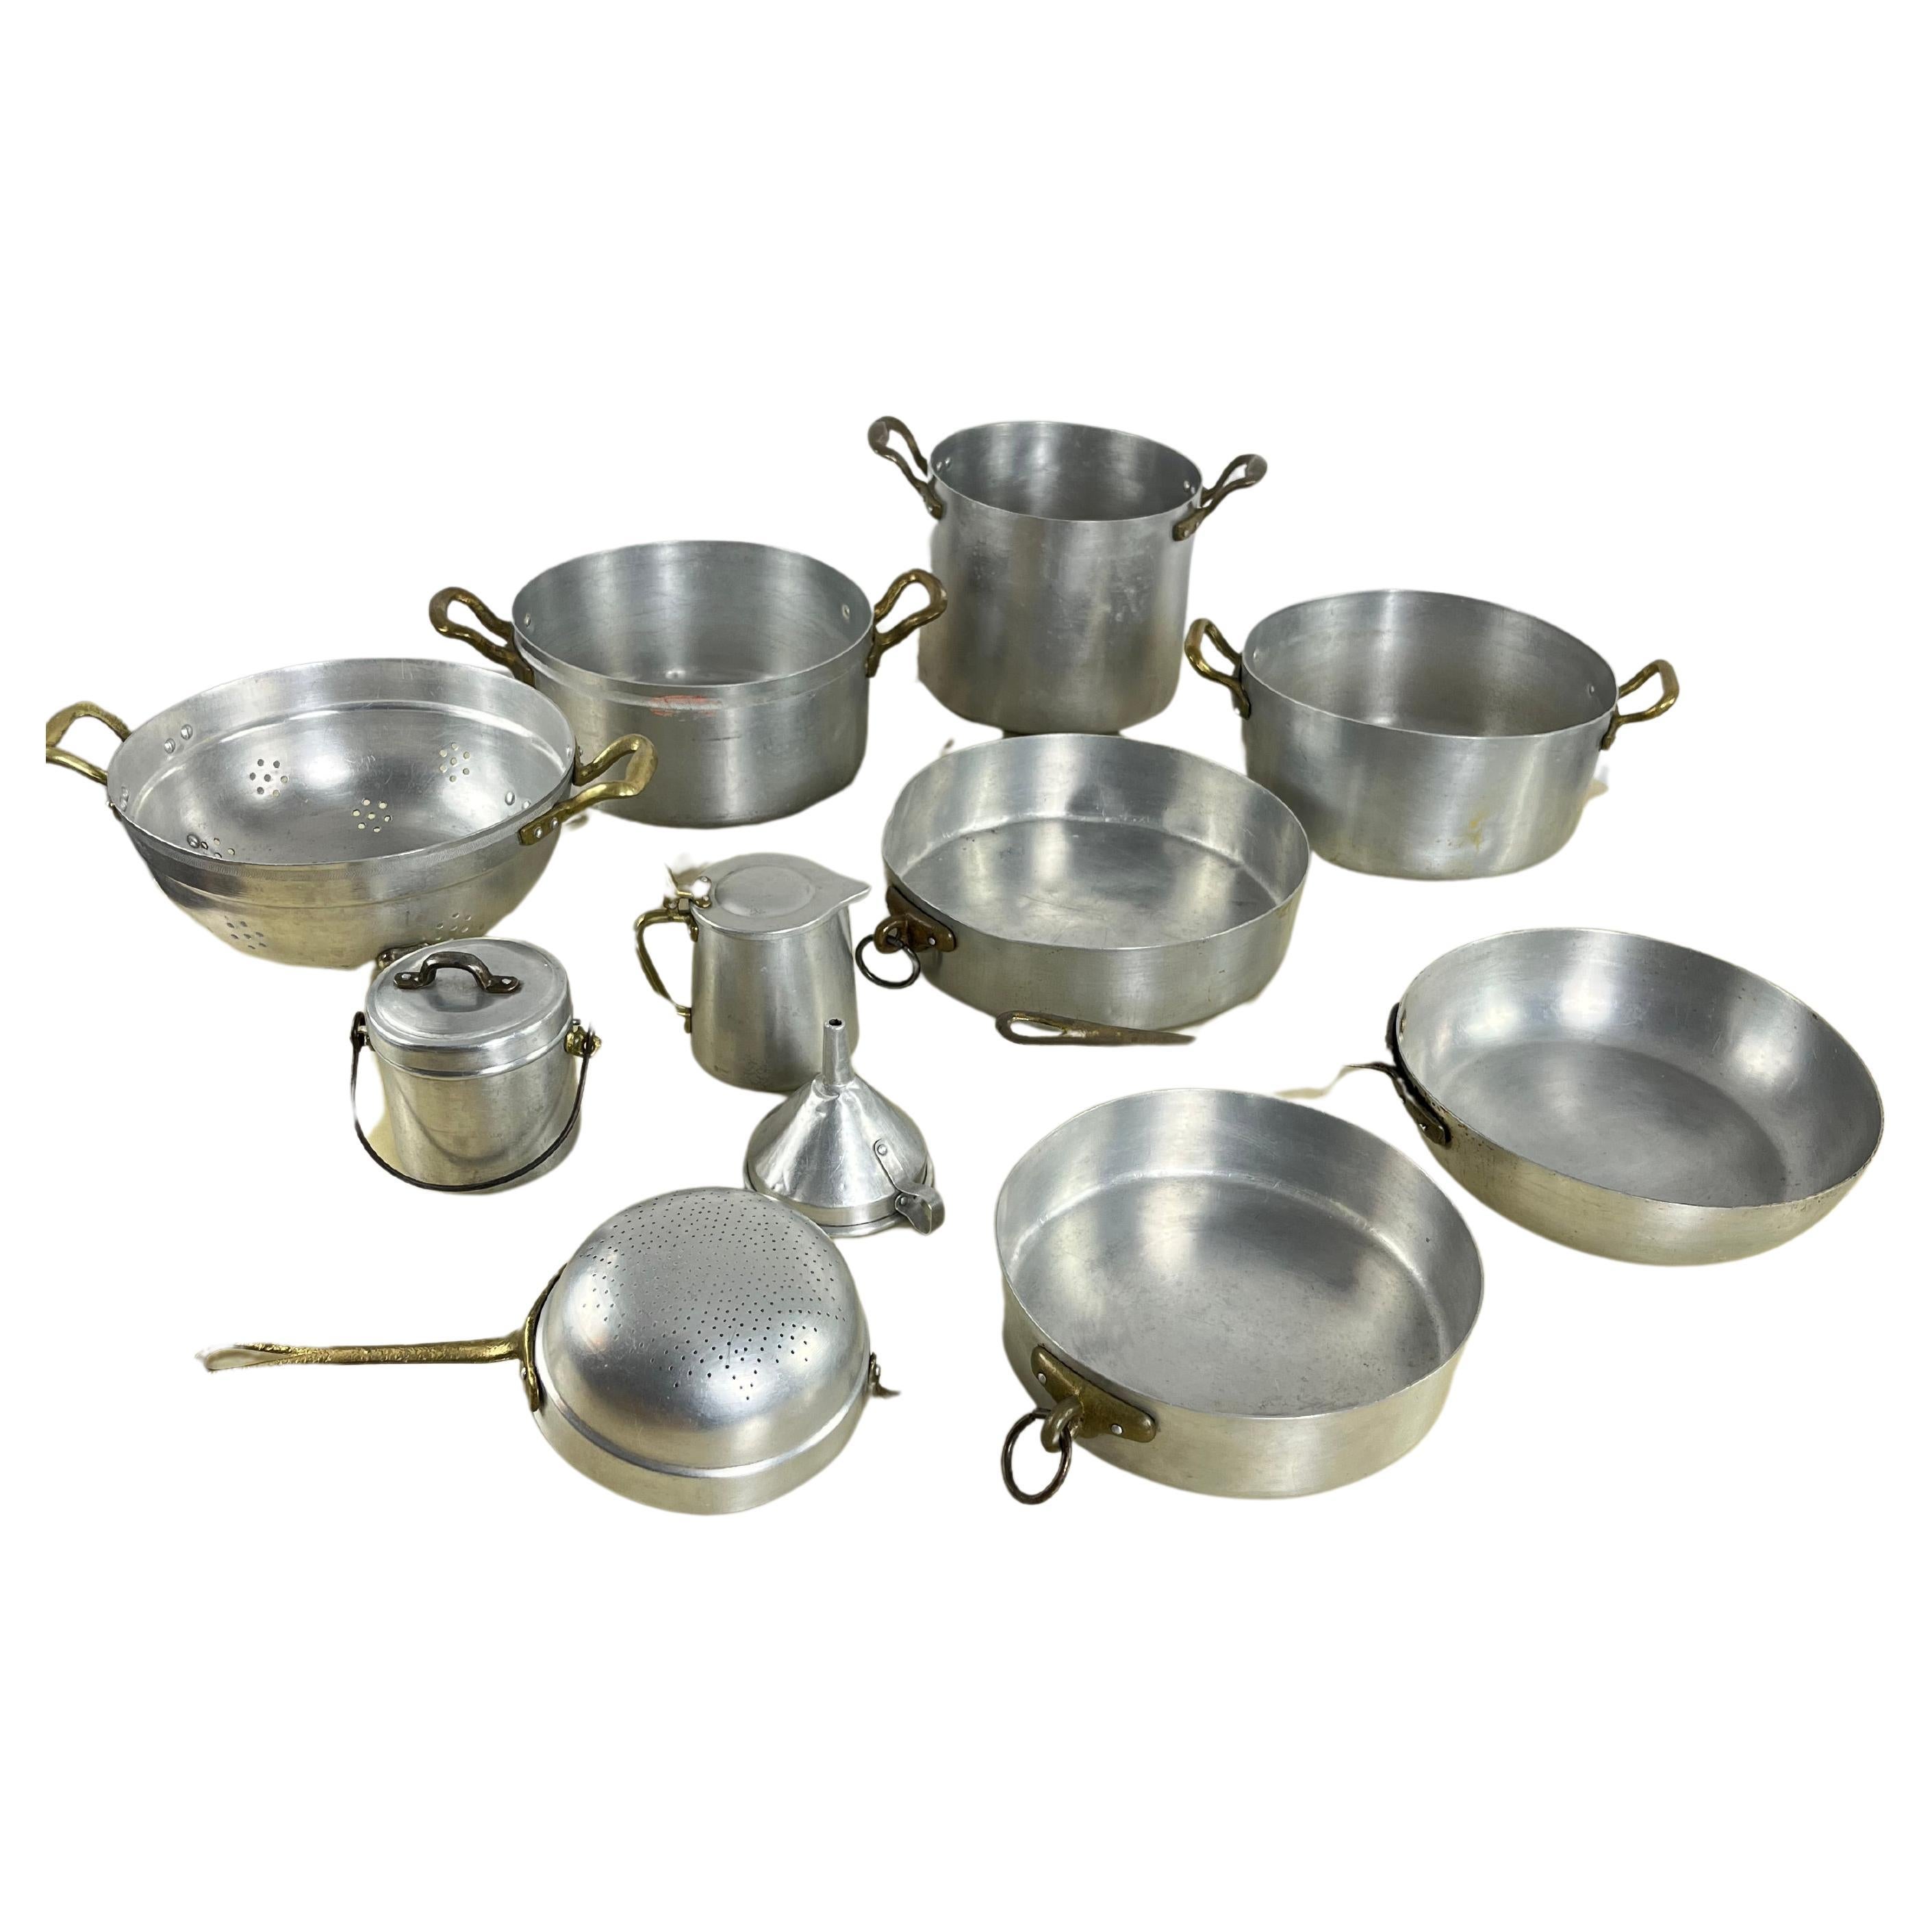 Set Of 11 Mid-Century Aluminum And Copper 1930s Cookware